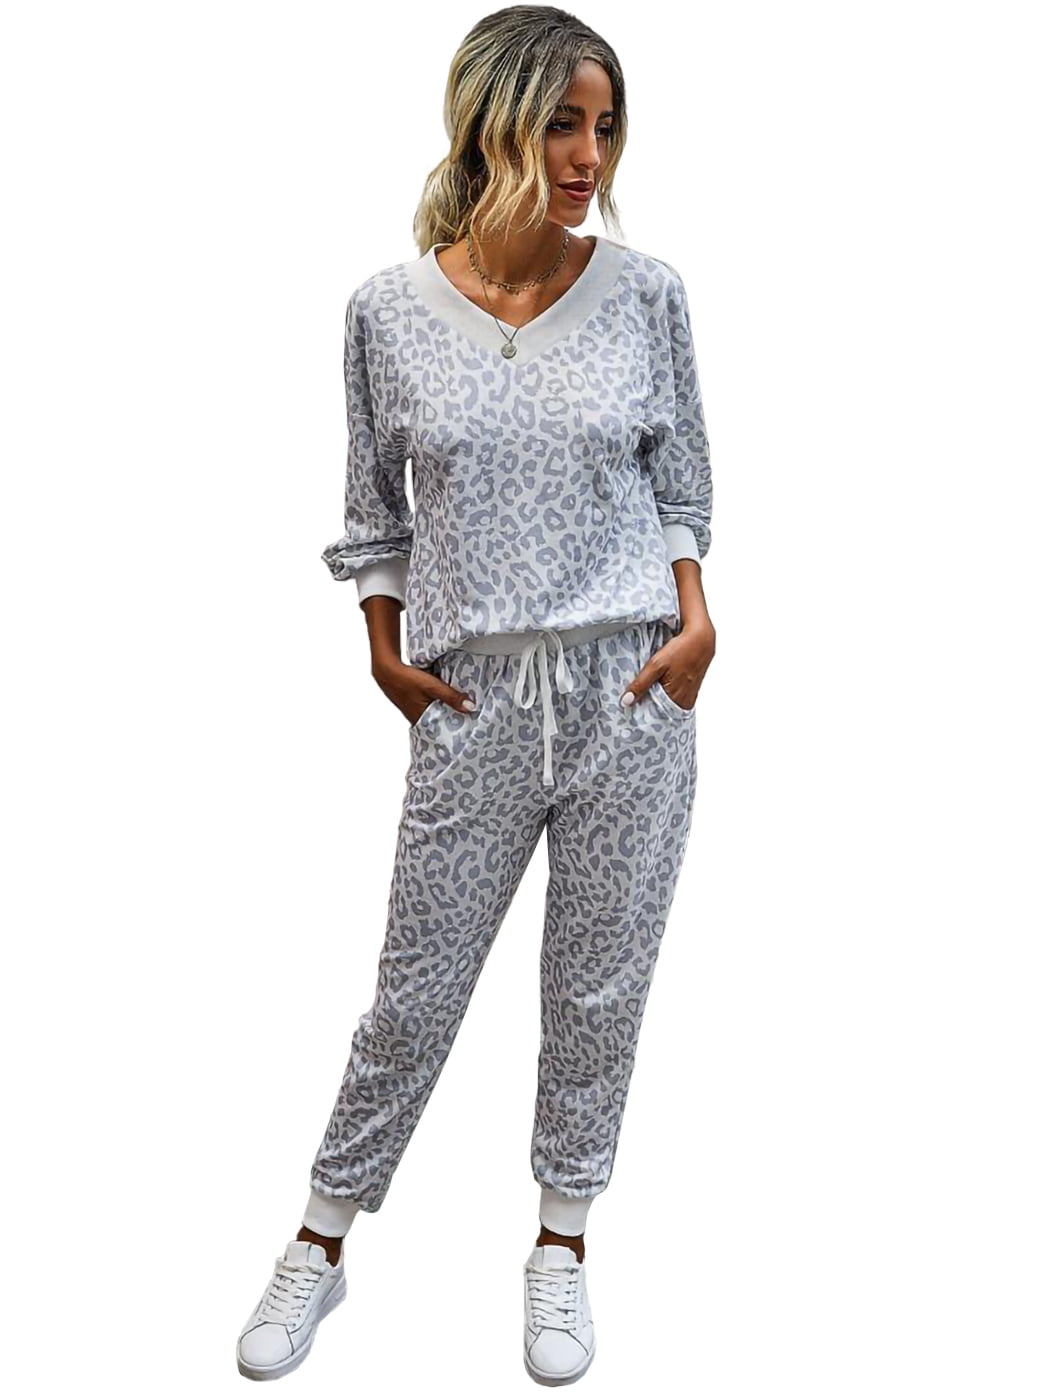 Famulily Womens Leopard Print Pyjama Sets Comfy 2 Piece Loungewear Set Jogging Bottoms and Tops with Pockets